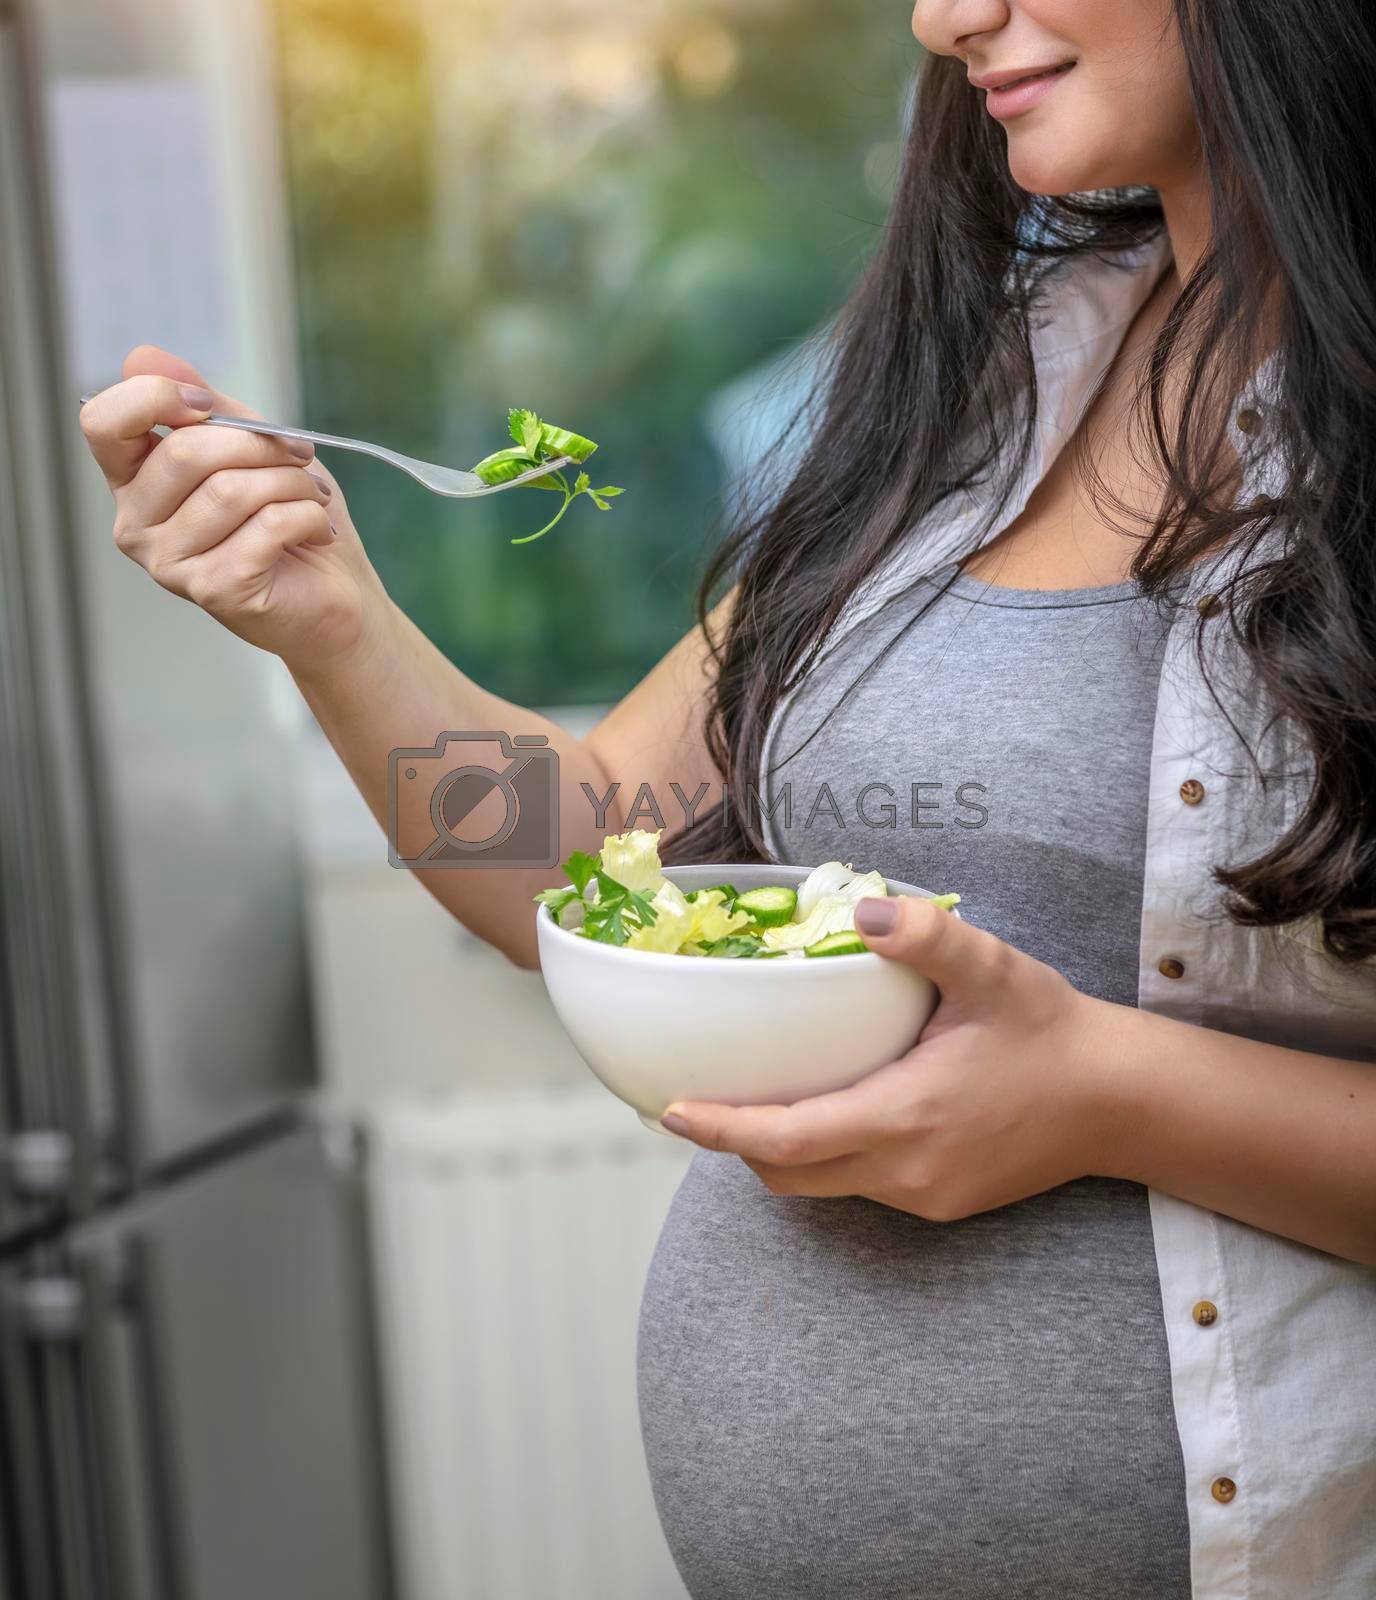 Royalty free image of Healthy Eating for a Pregnant Woman by Anna_Omelchenko